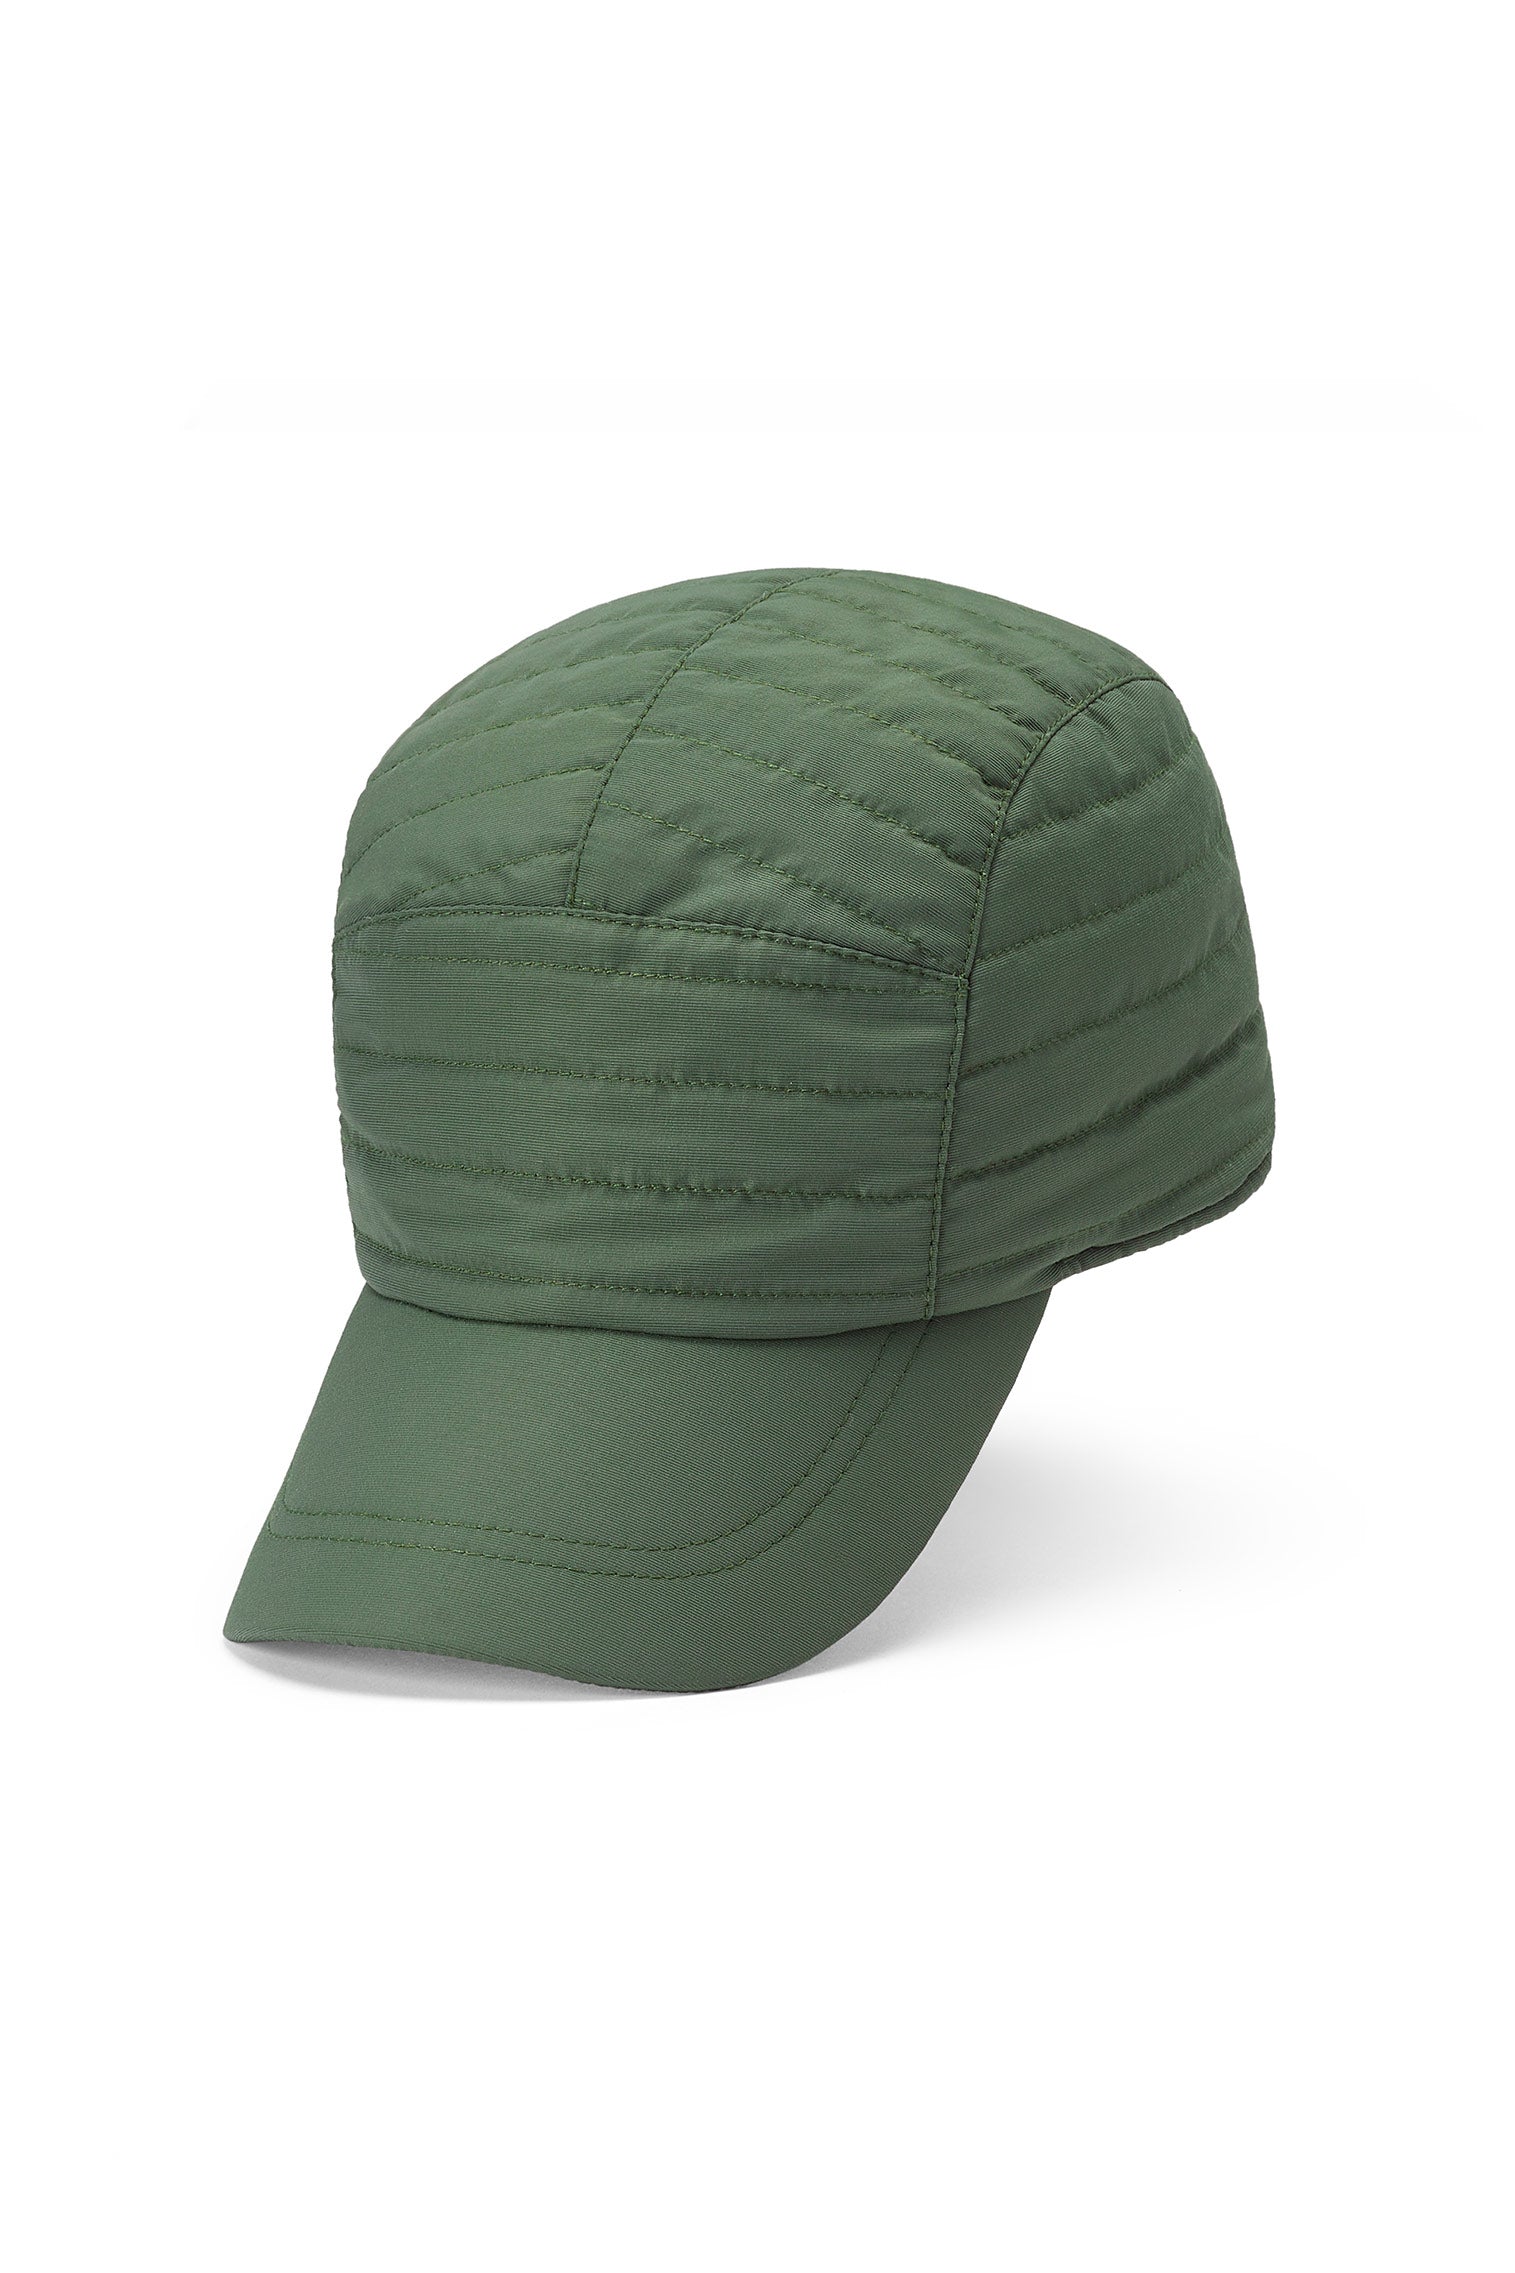 Winterton Quilted Baseball Cap - Mother's Day Gift Guide - Lock & Co. Hatters London UK